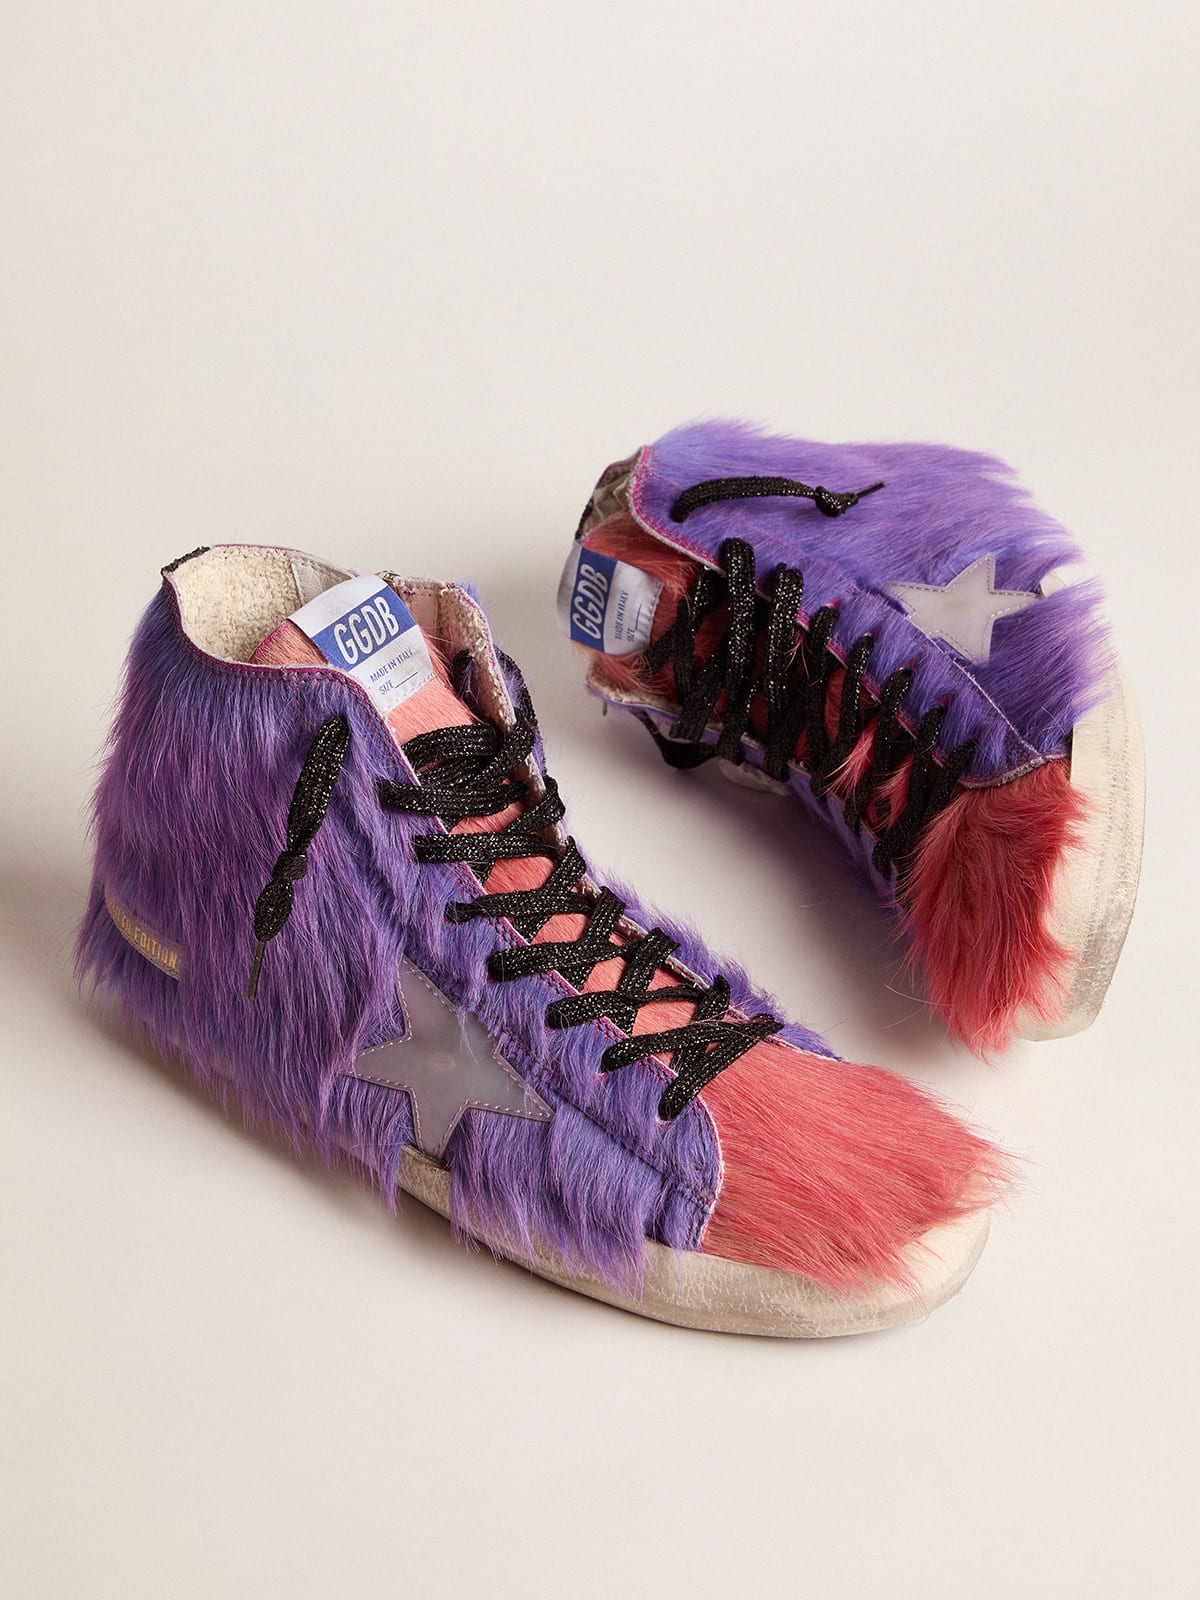 Golden Goose - Men’s Limited Edition lilac and pink pony skin Francy sneakers in 